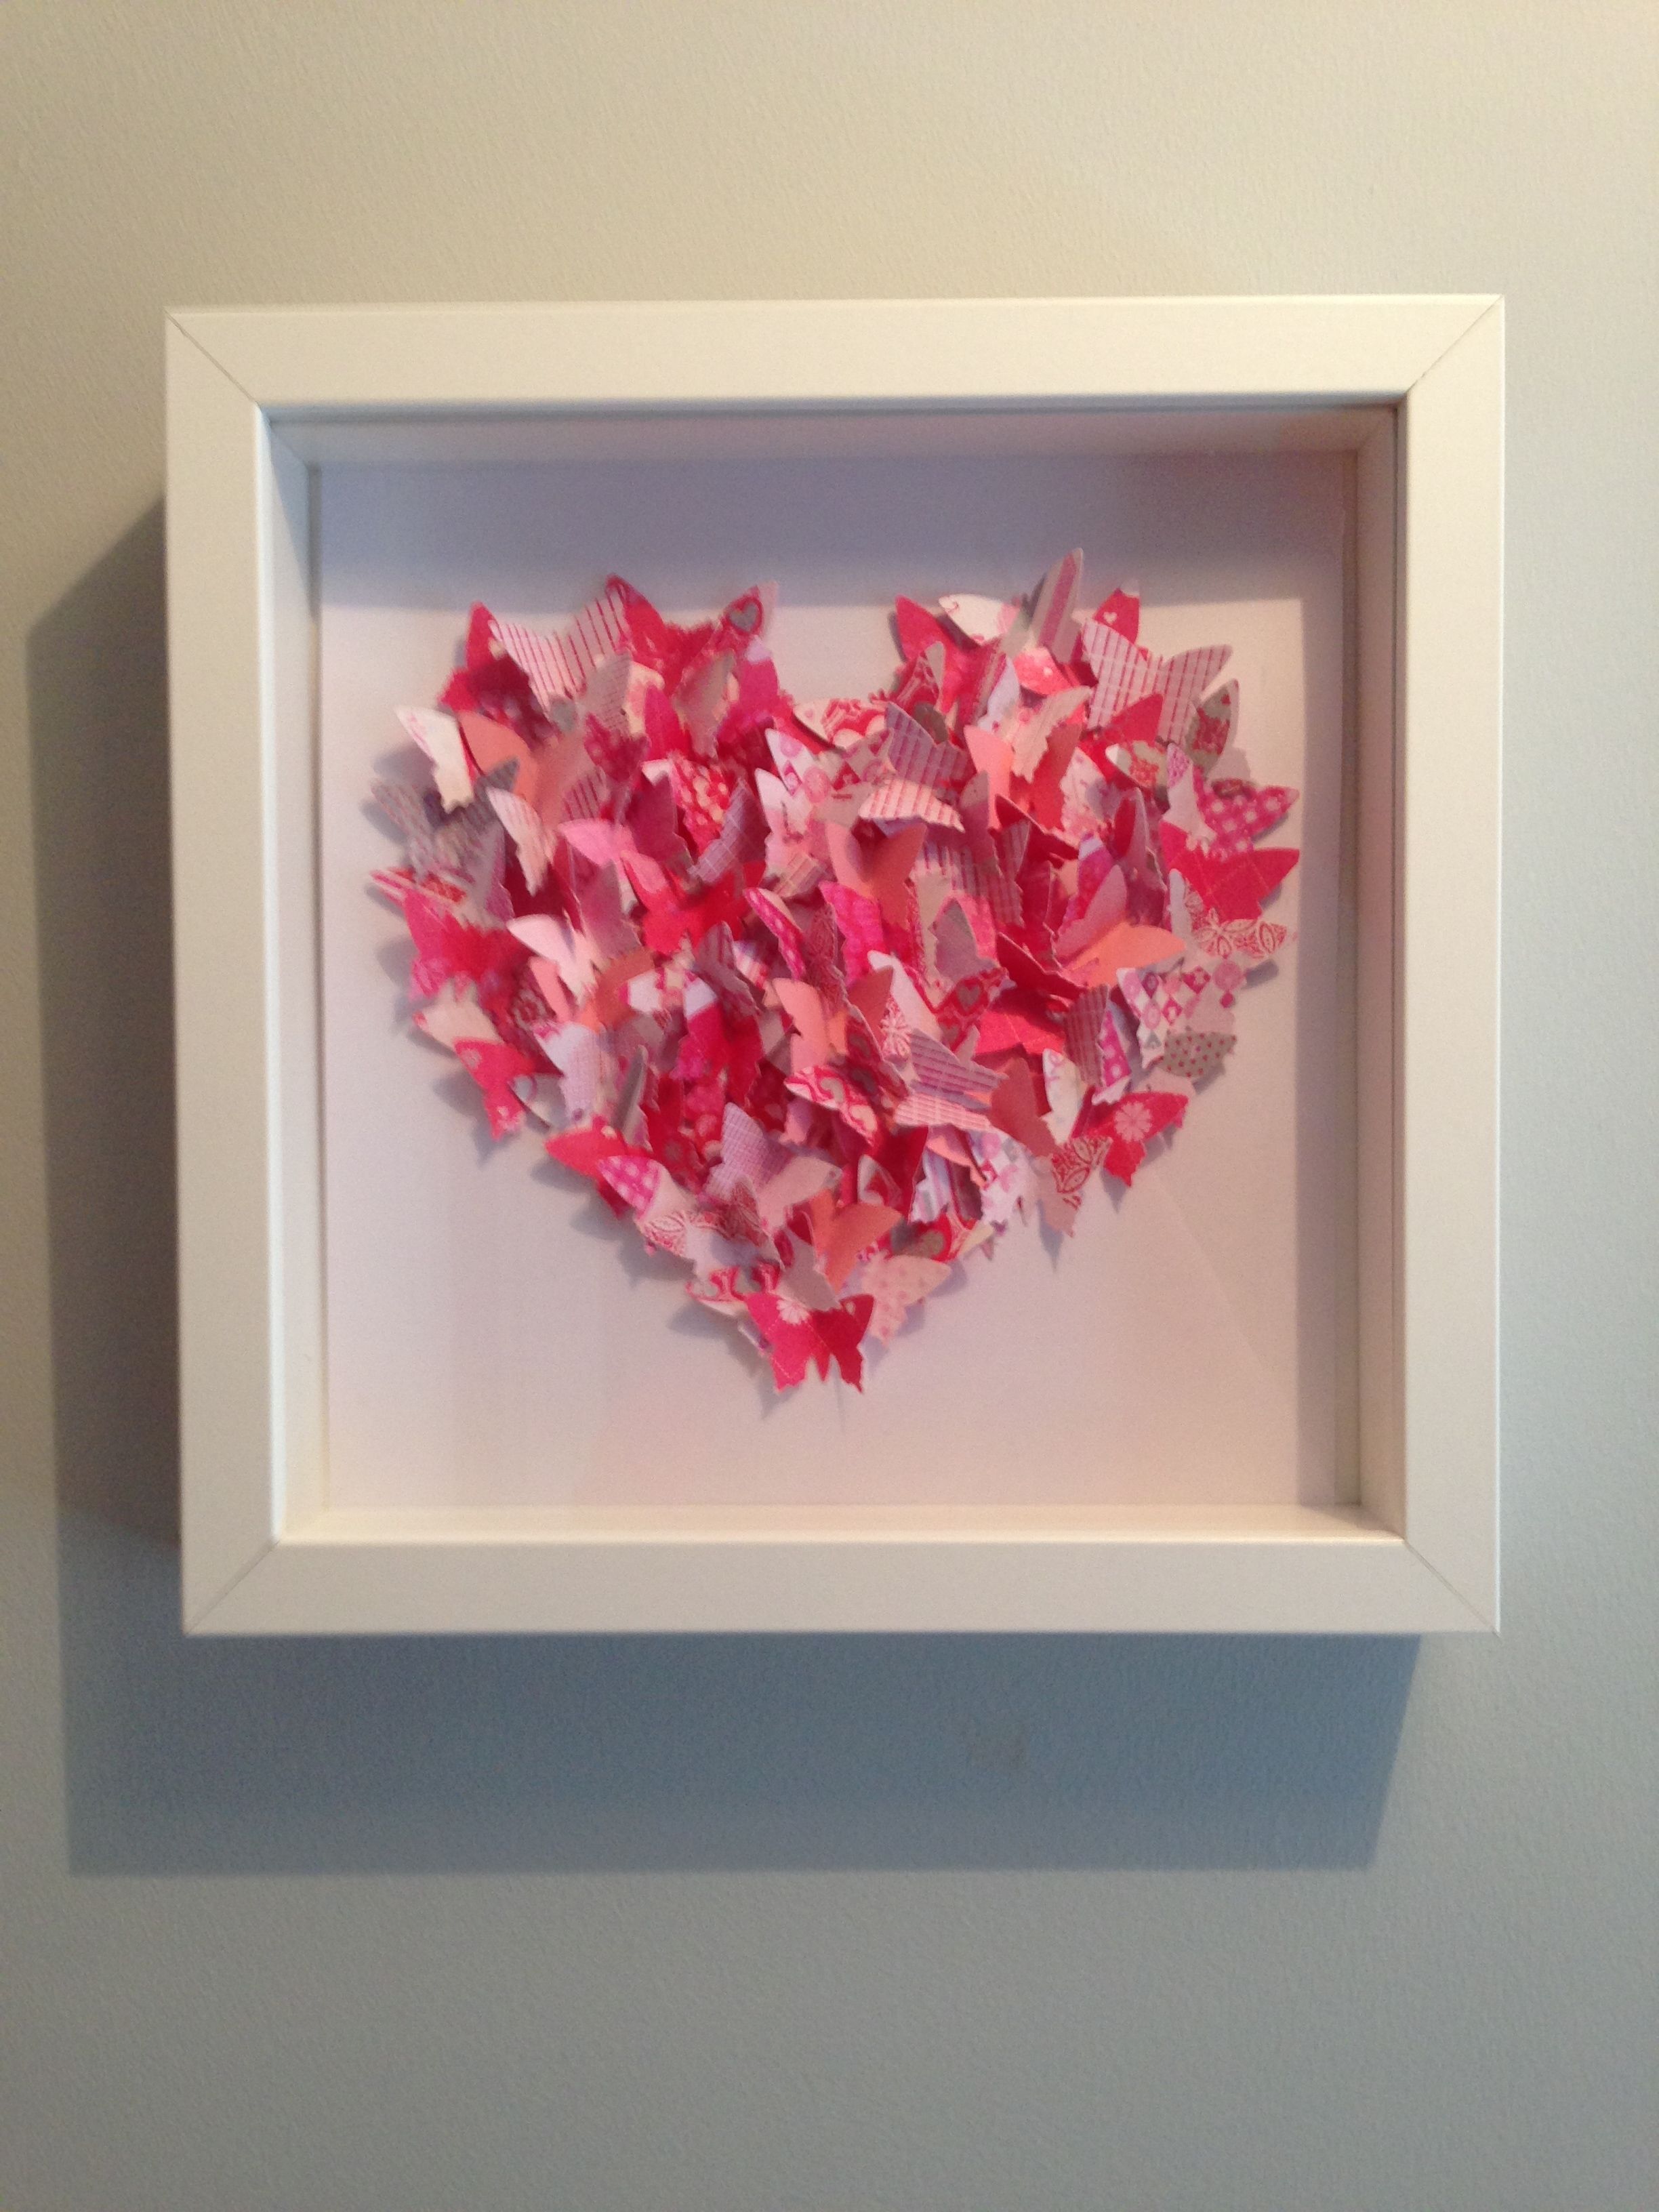 Hanging With Regard To Heart 3d Wall Art (View 8 of 15)